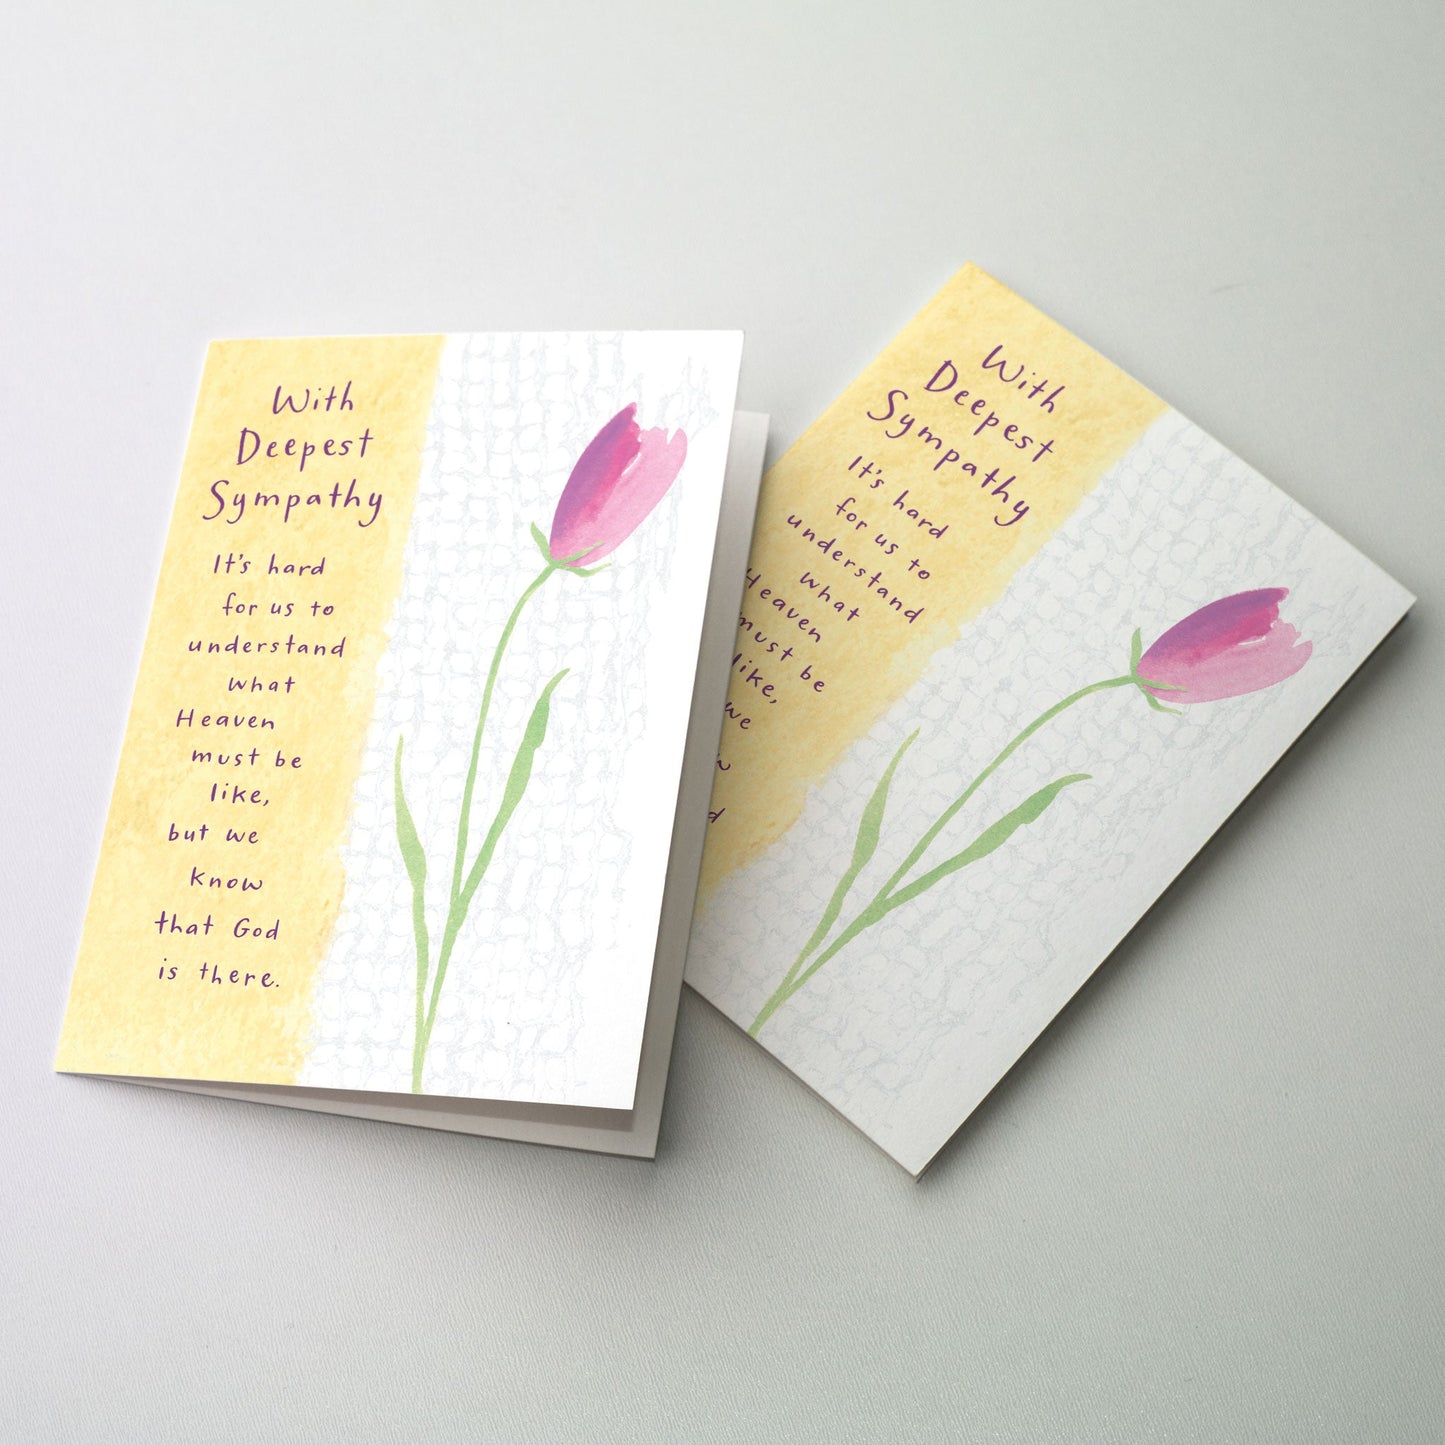 Sharing another&rsquo;s grief in bereavement is a moment of profound intimacy. Let them know you are with them in their sorrow. The cards are printed on recycled paper and measure 5 x 7 inches.